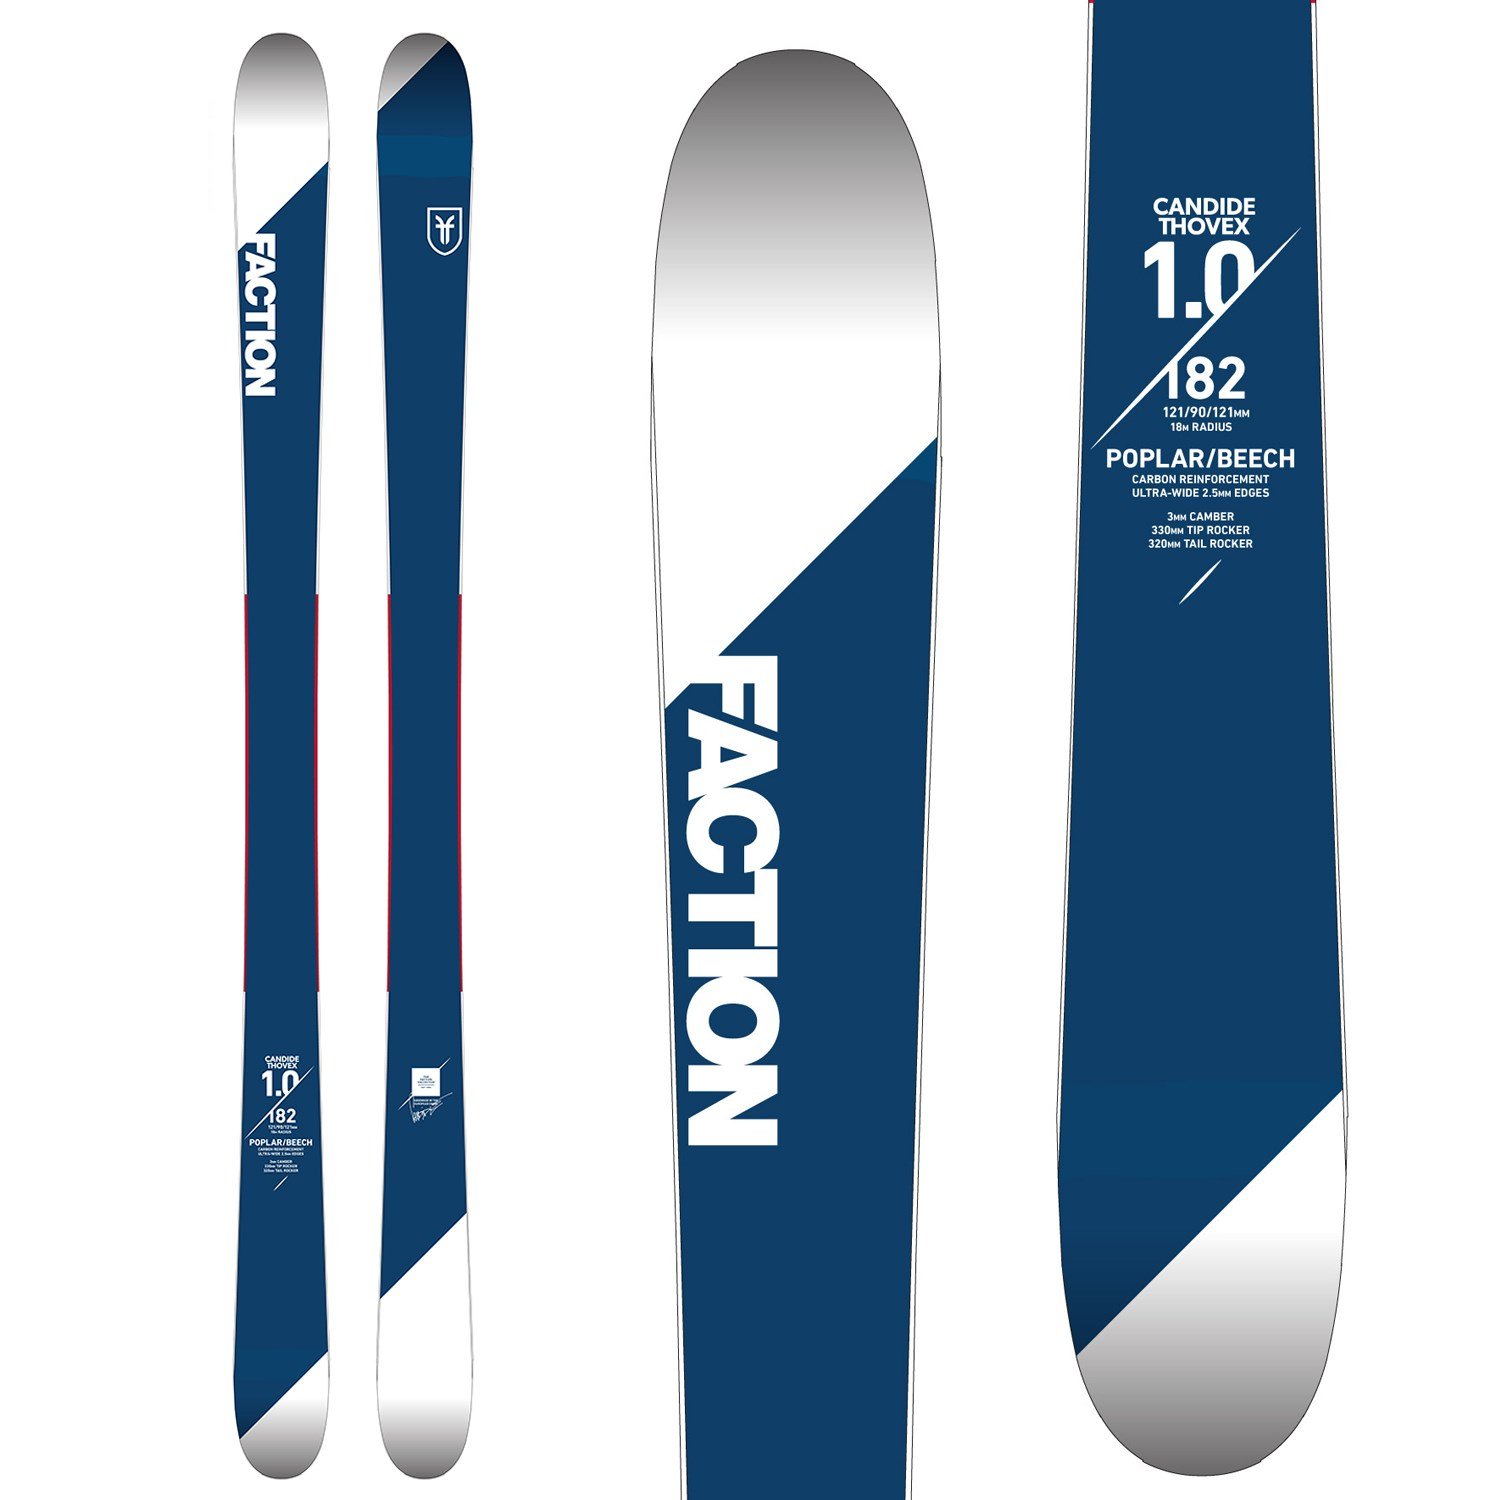 Faction Candide 1.0 Skis 2018 | evo